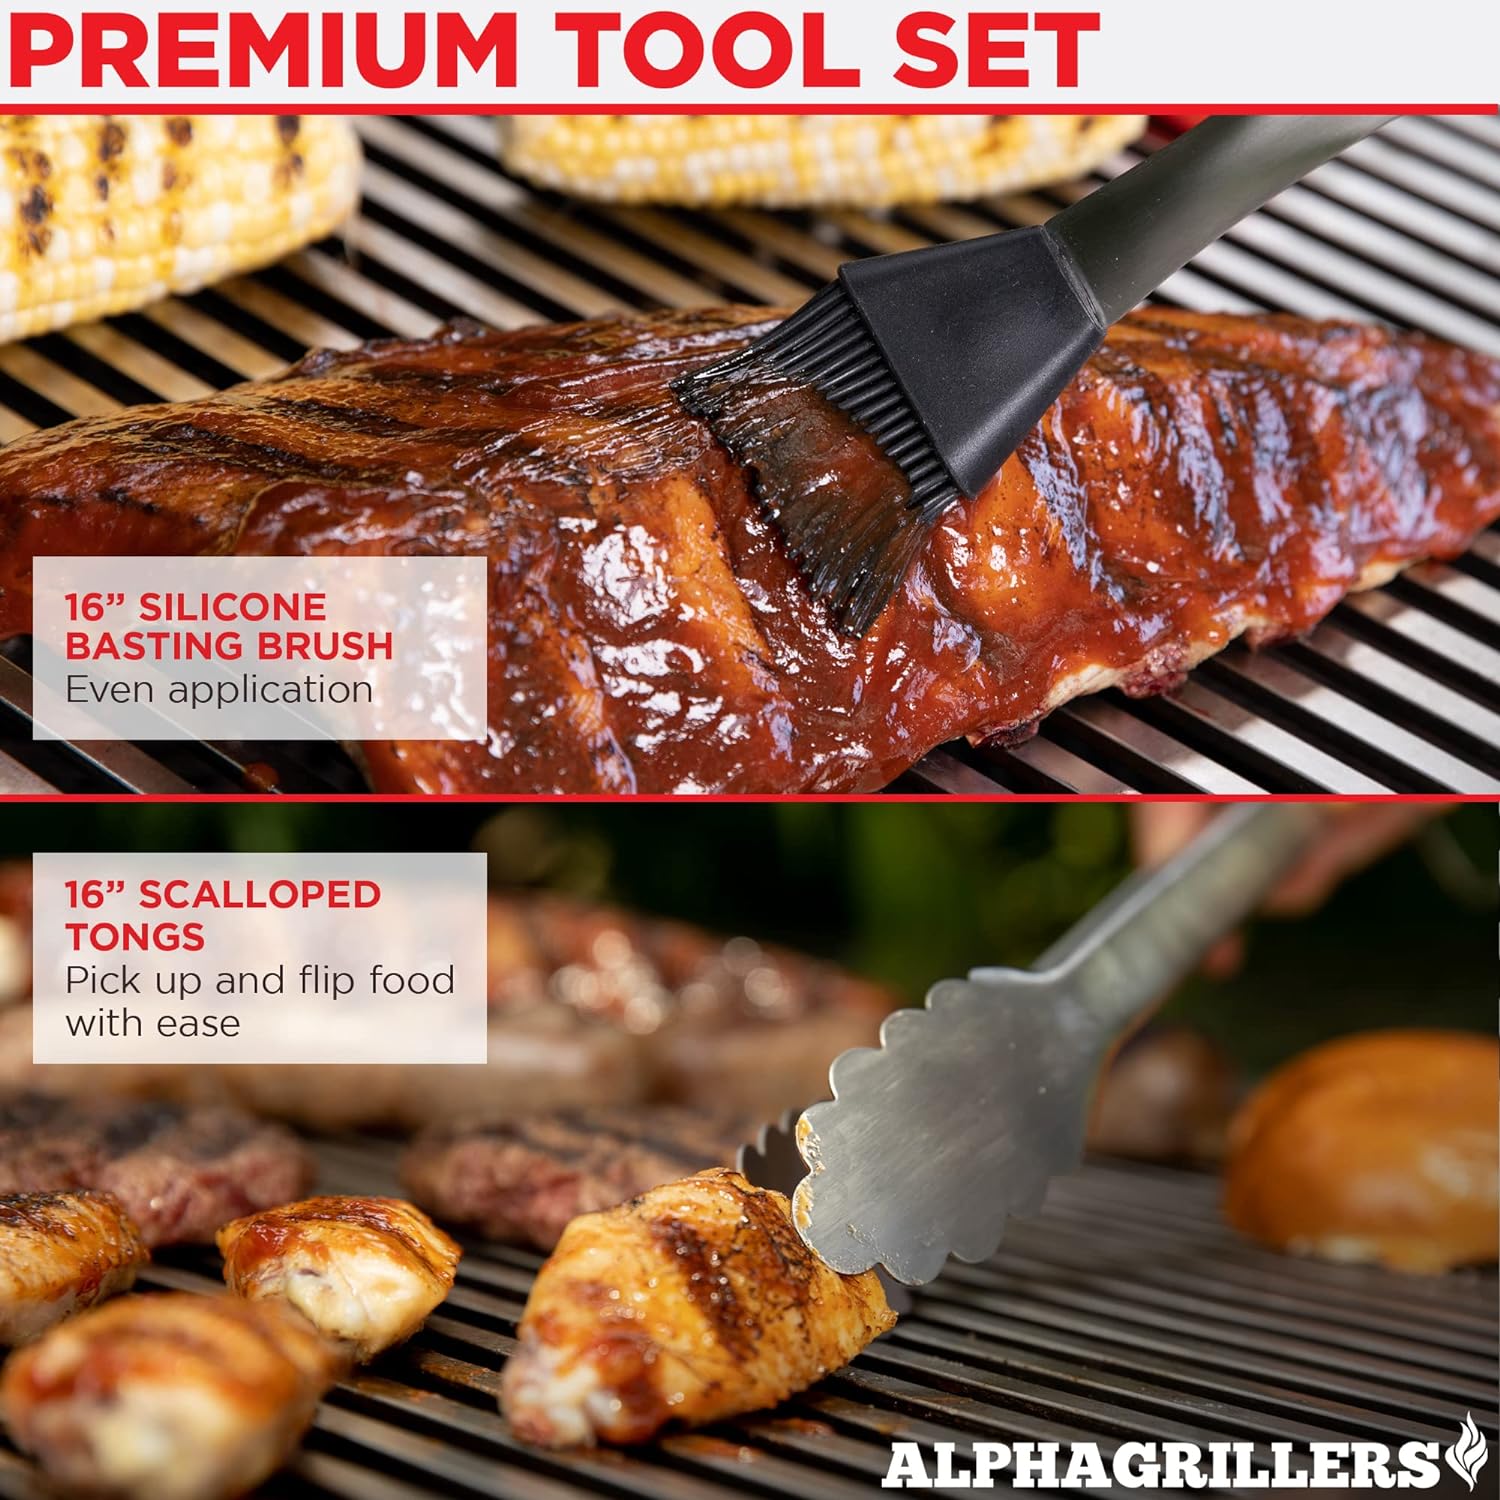 Premium BBQ Grilling Tools Set. Extremely Heavy Duty Stainless Steel Spatula, Locking Tongs and Fork Accessories